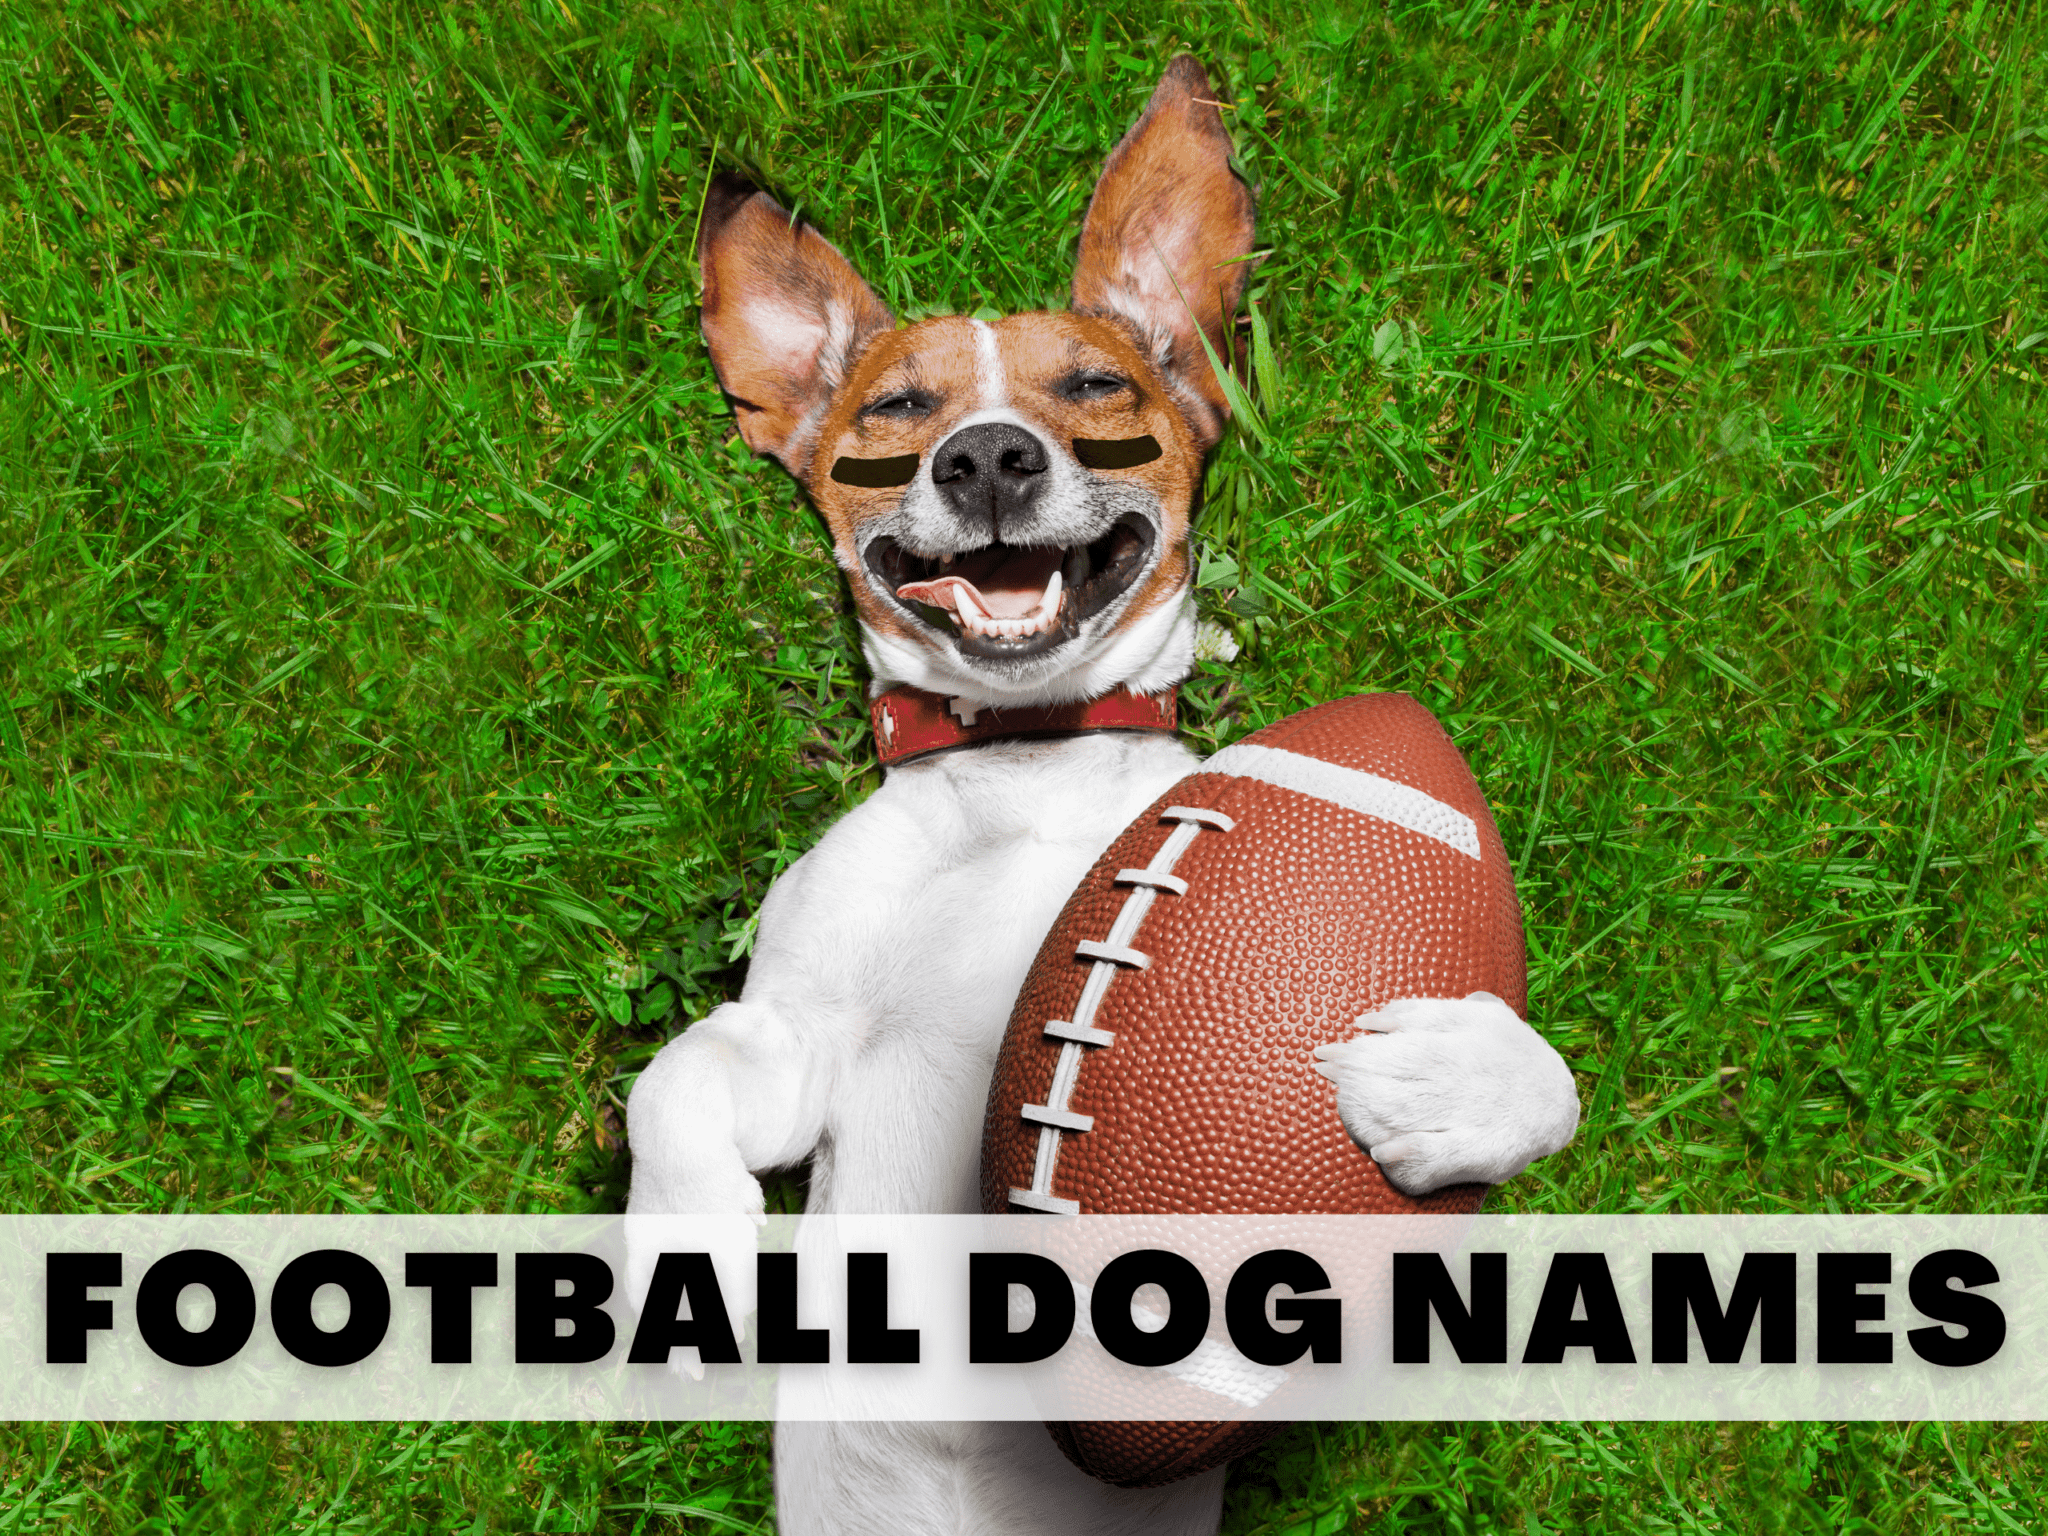 100-unique-football-dog-names-for-athletic-sporty-pups